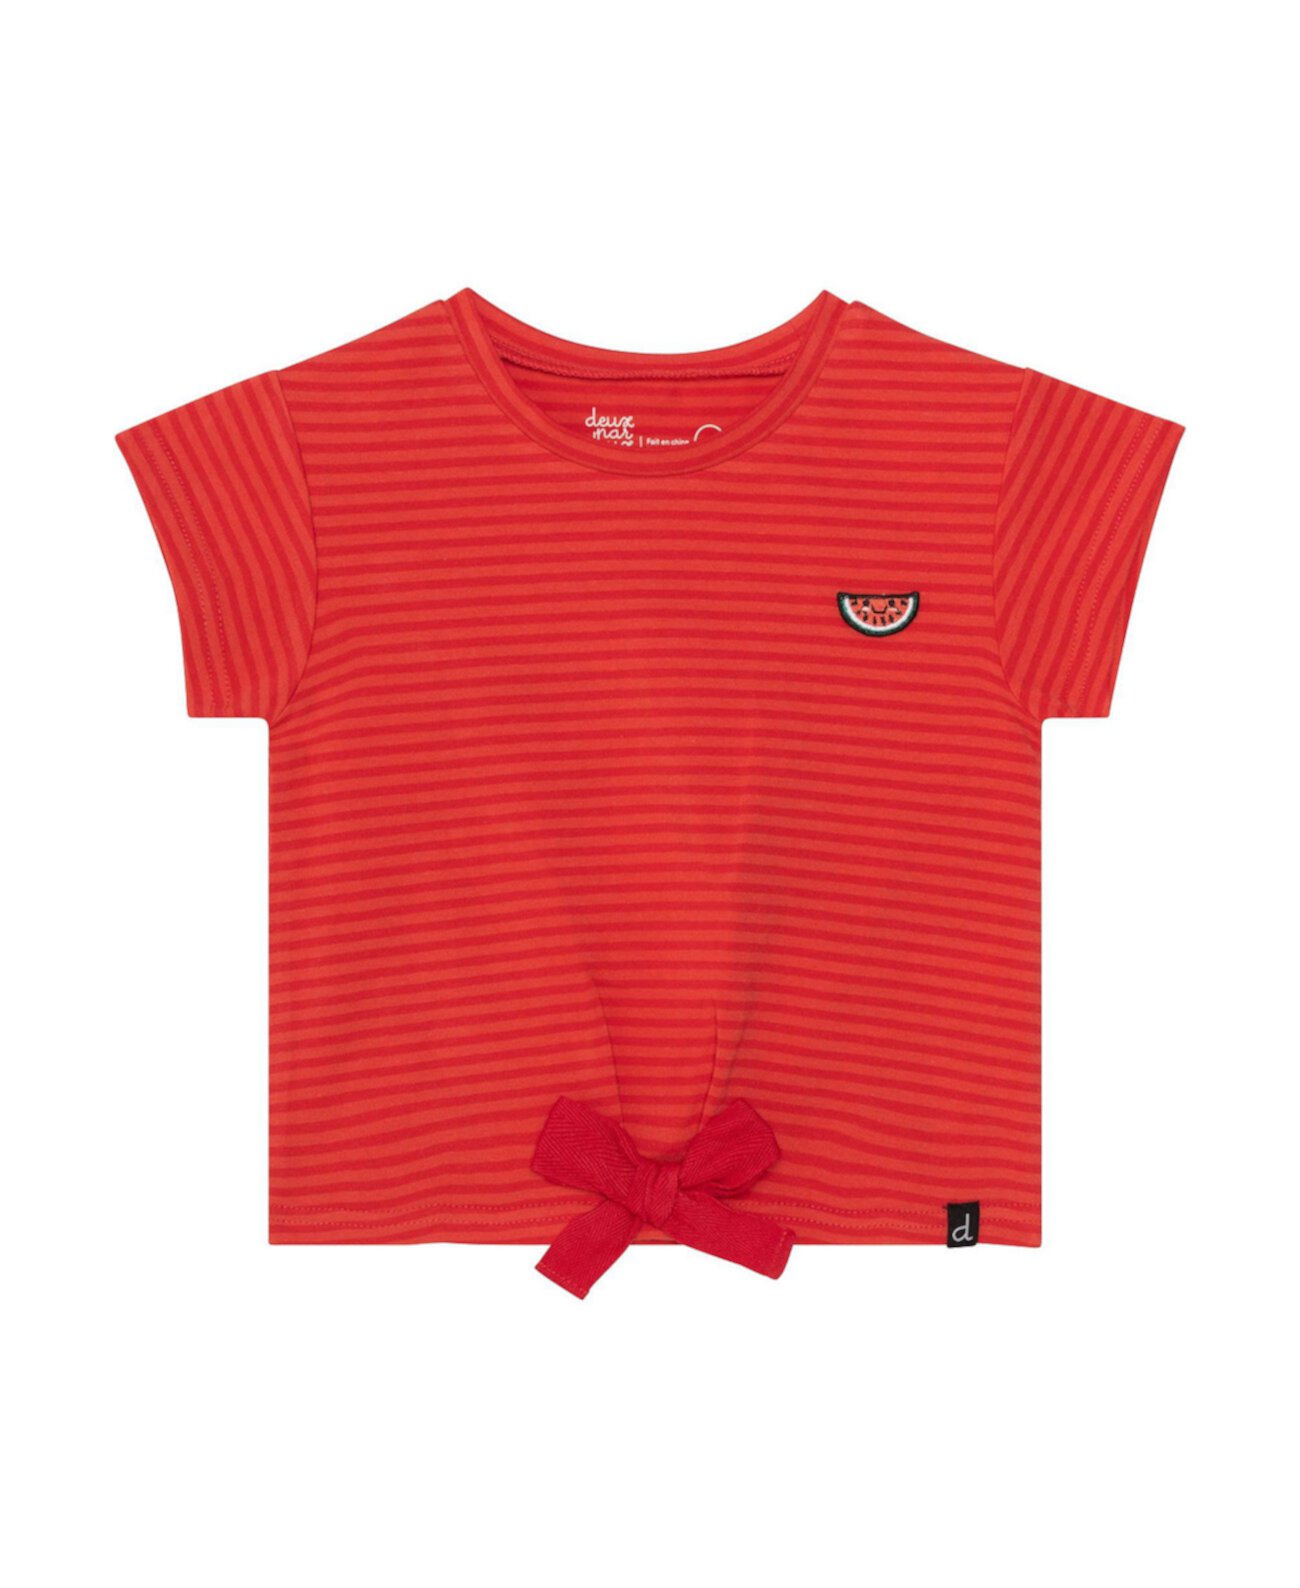 Girl Organic Cotton Striped Short Sleeve Top With Bow Red - Toddler|Child Deux par Deux